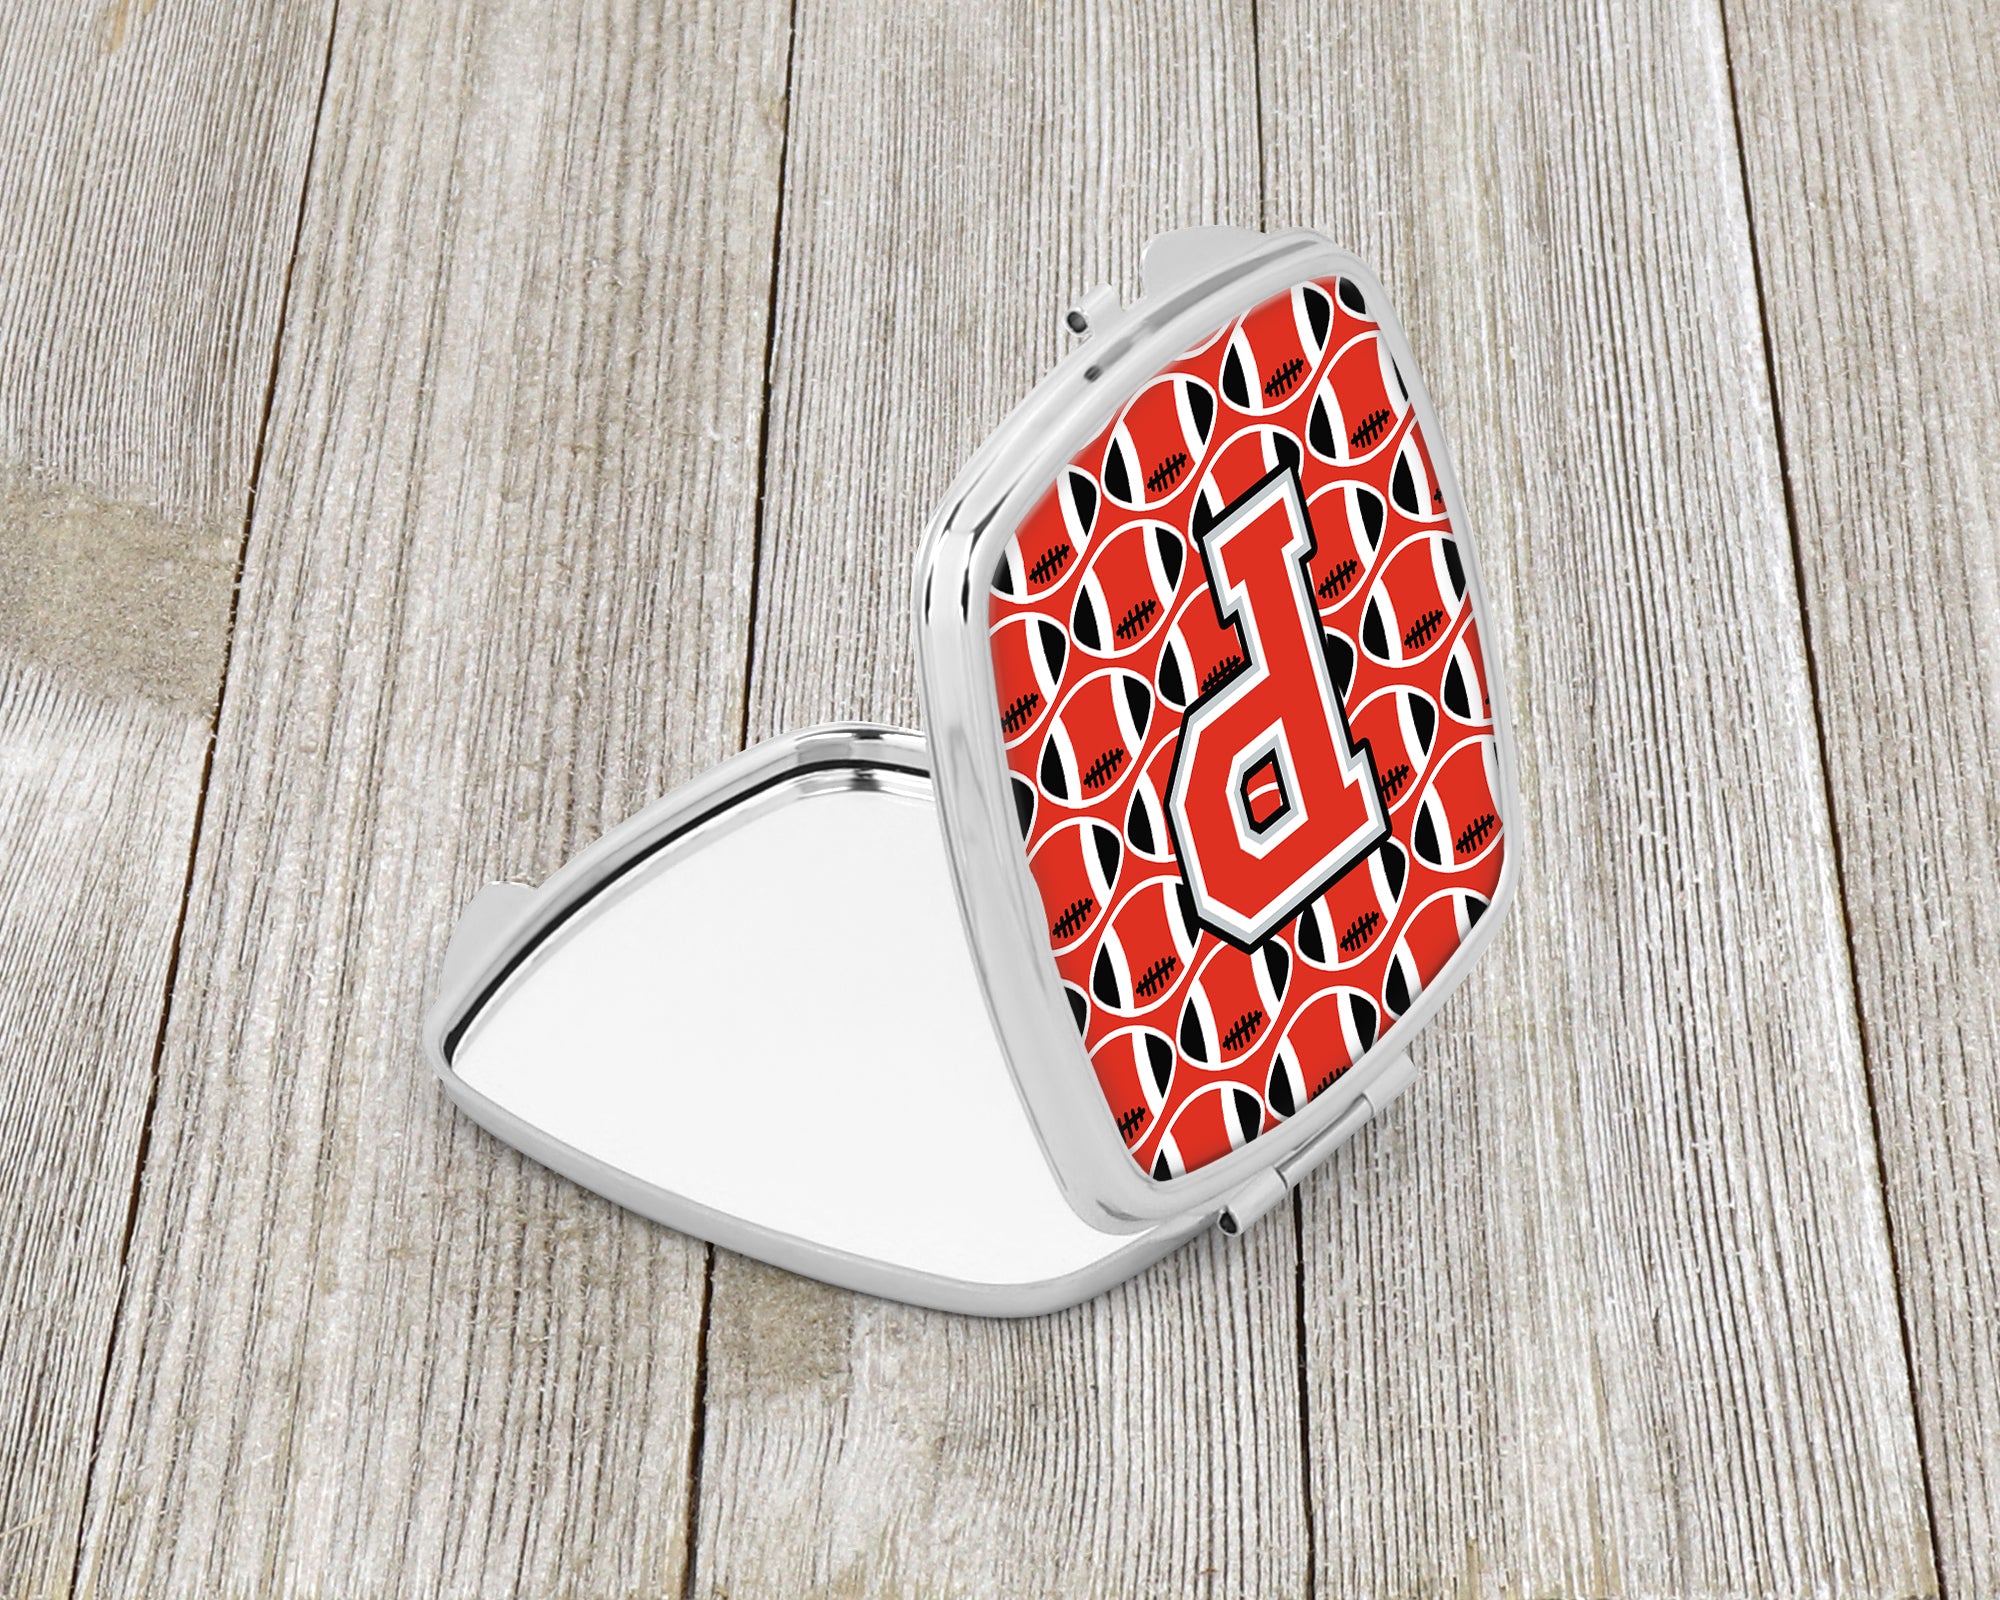 Letter P Football Scarlet and Grey Compact Mirror CJ1067-PSCM  the-store.com.